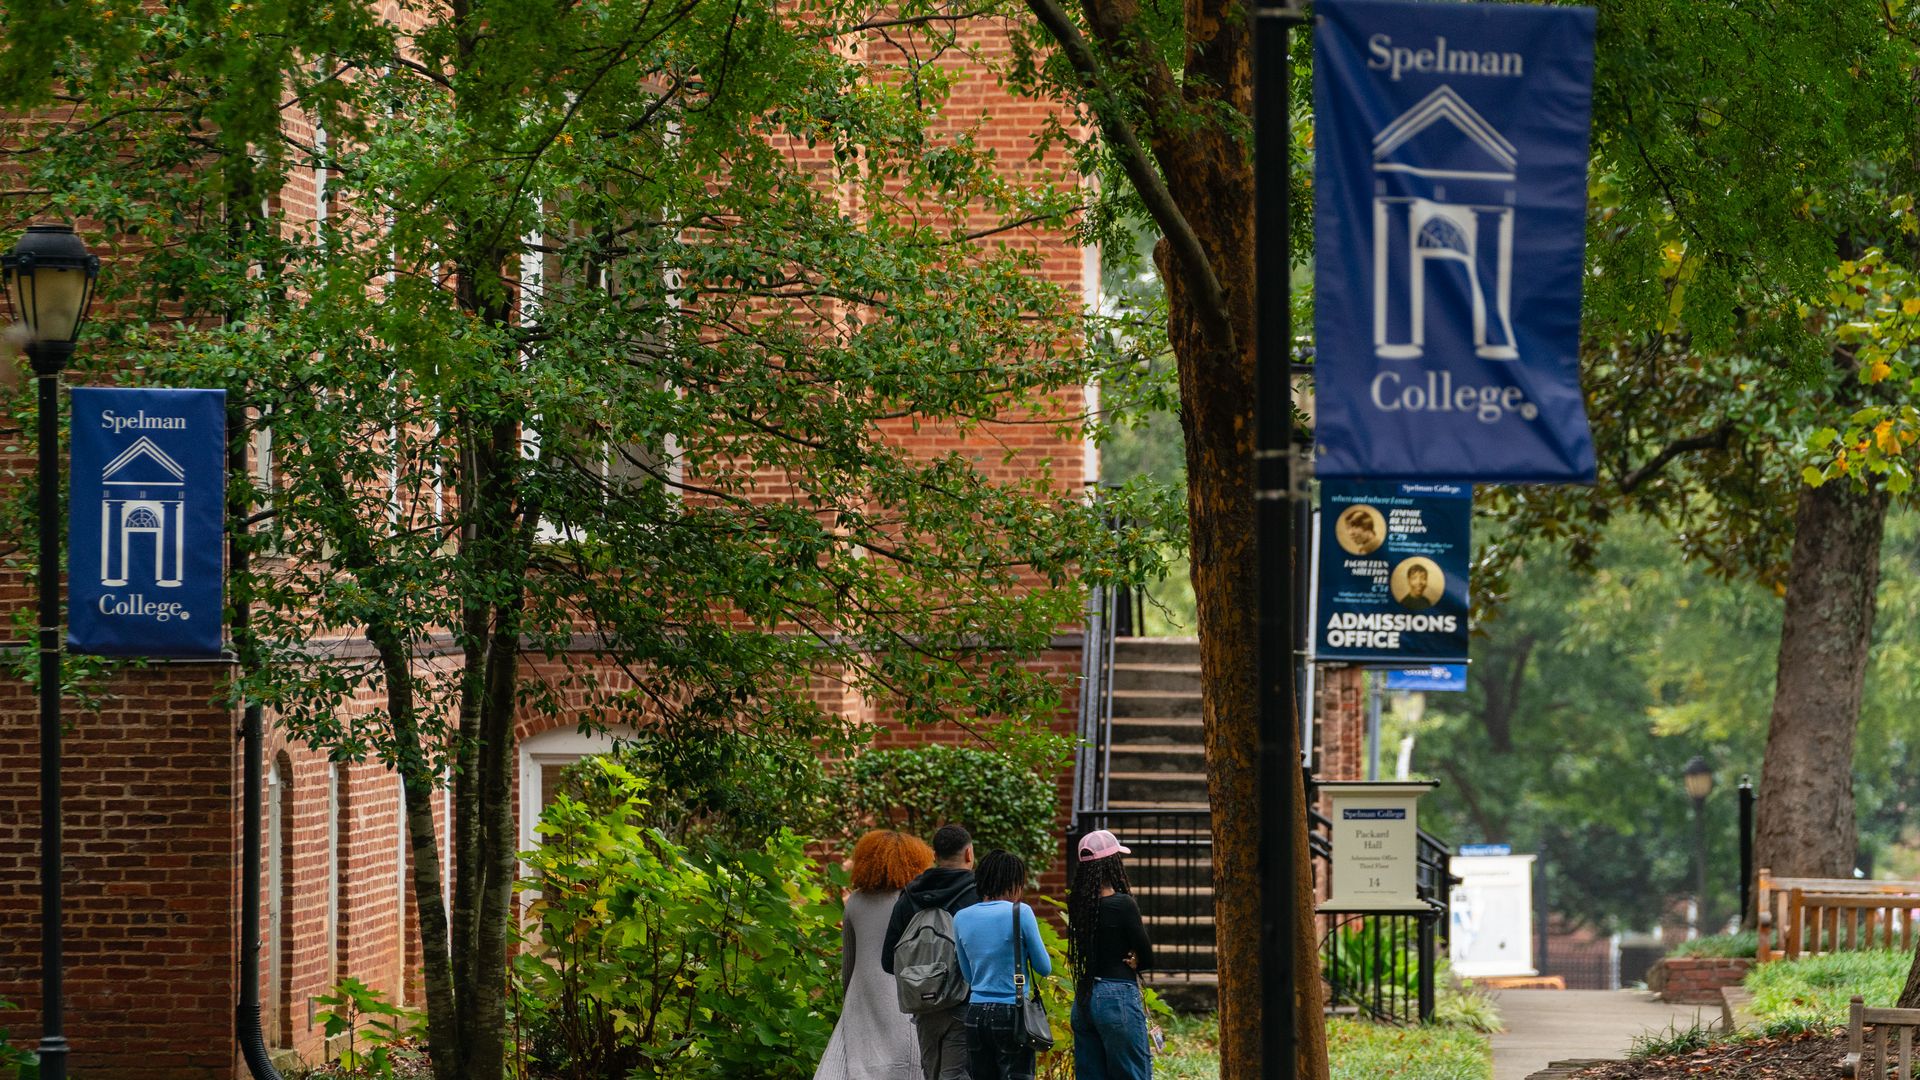 Students at the Spelman College campus in Atlanta, Georgia, US, on Friday, Oct. 13